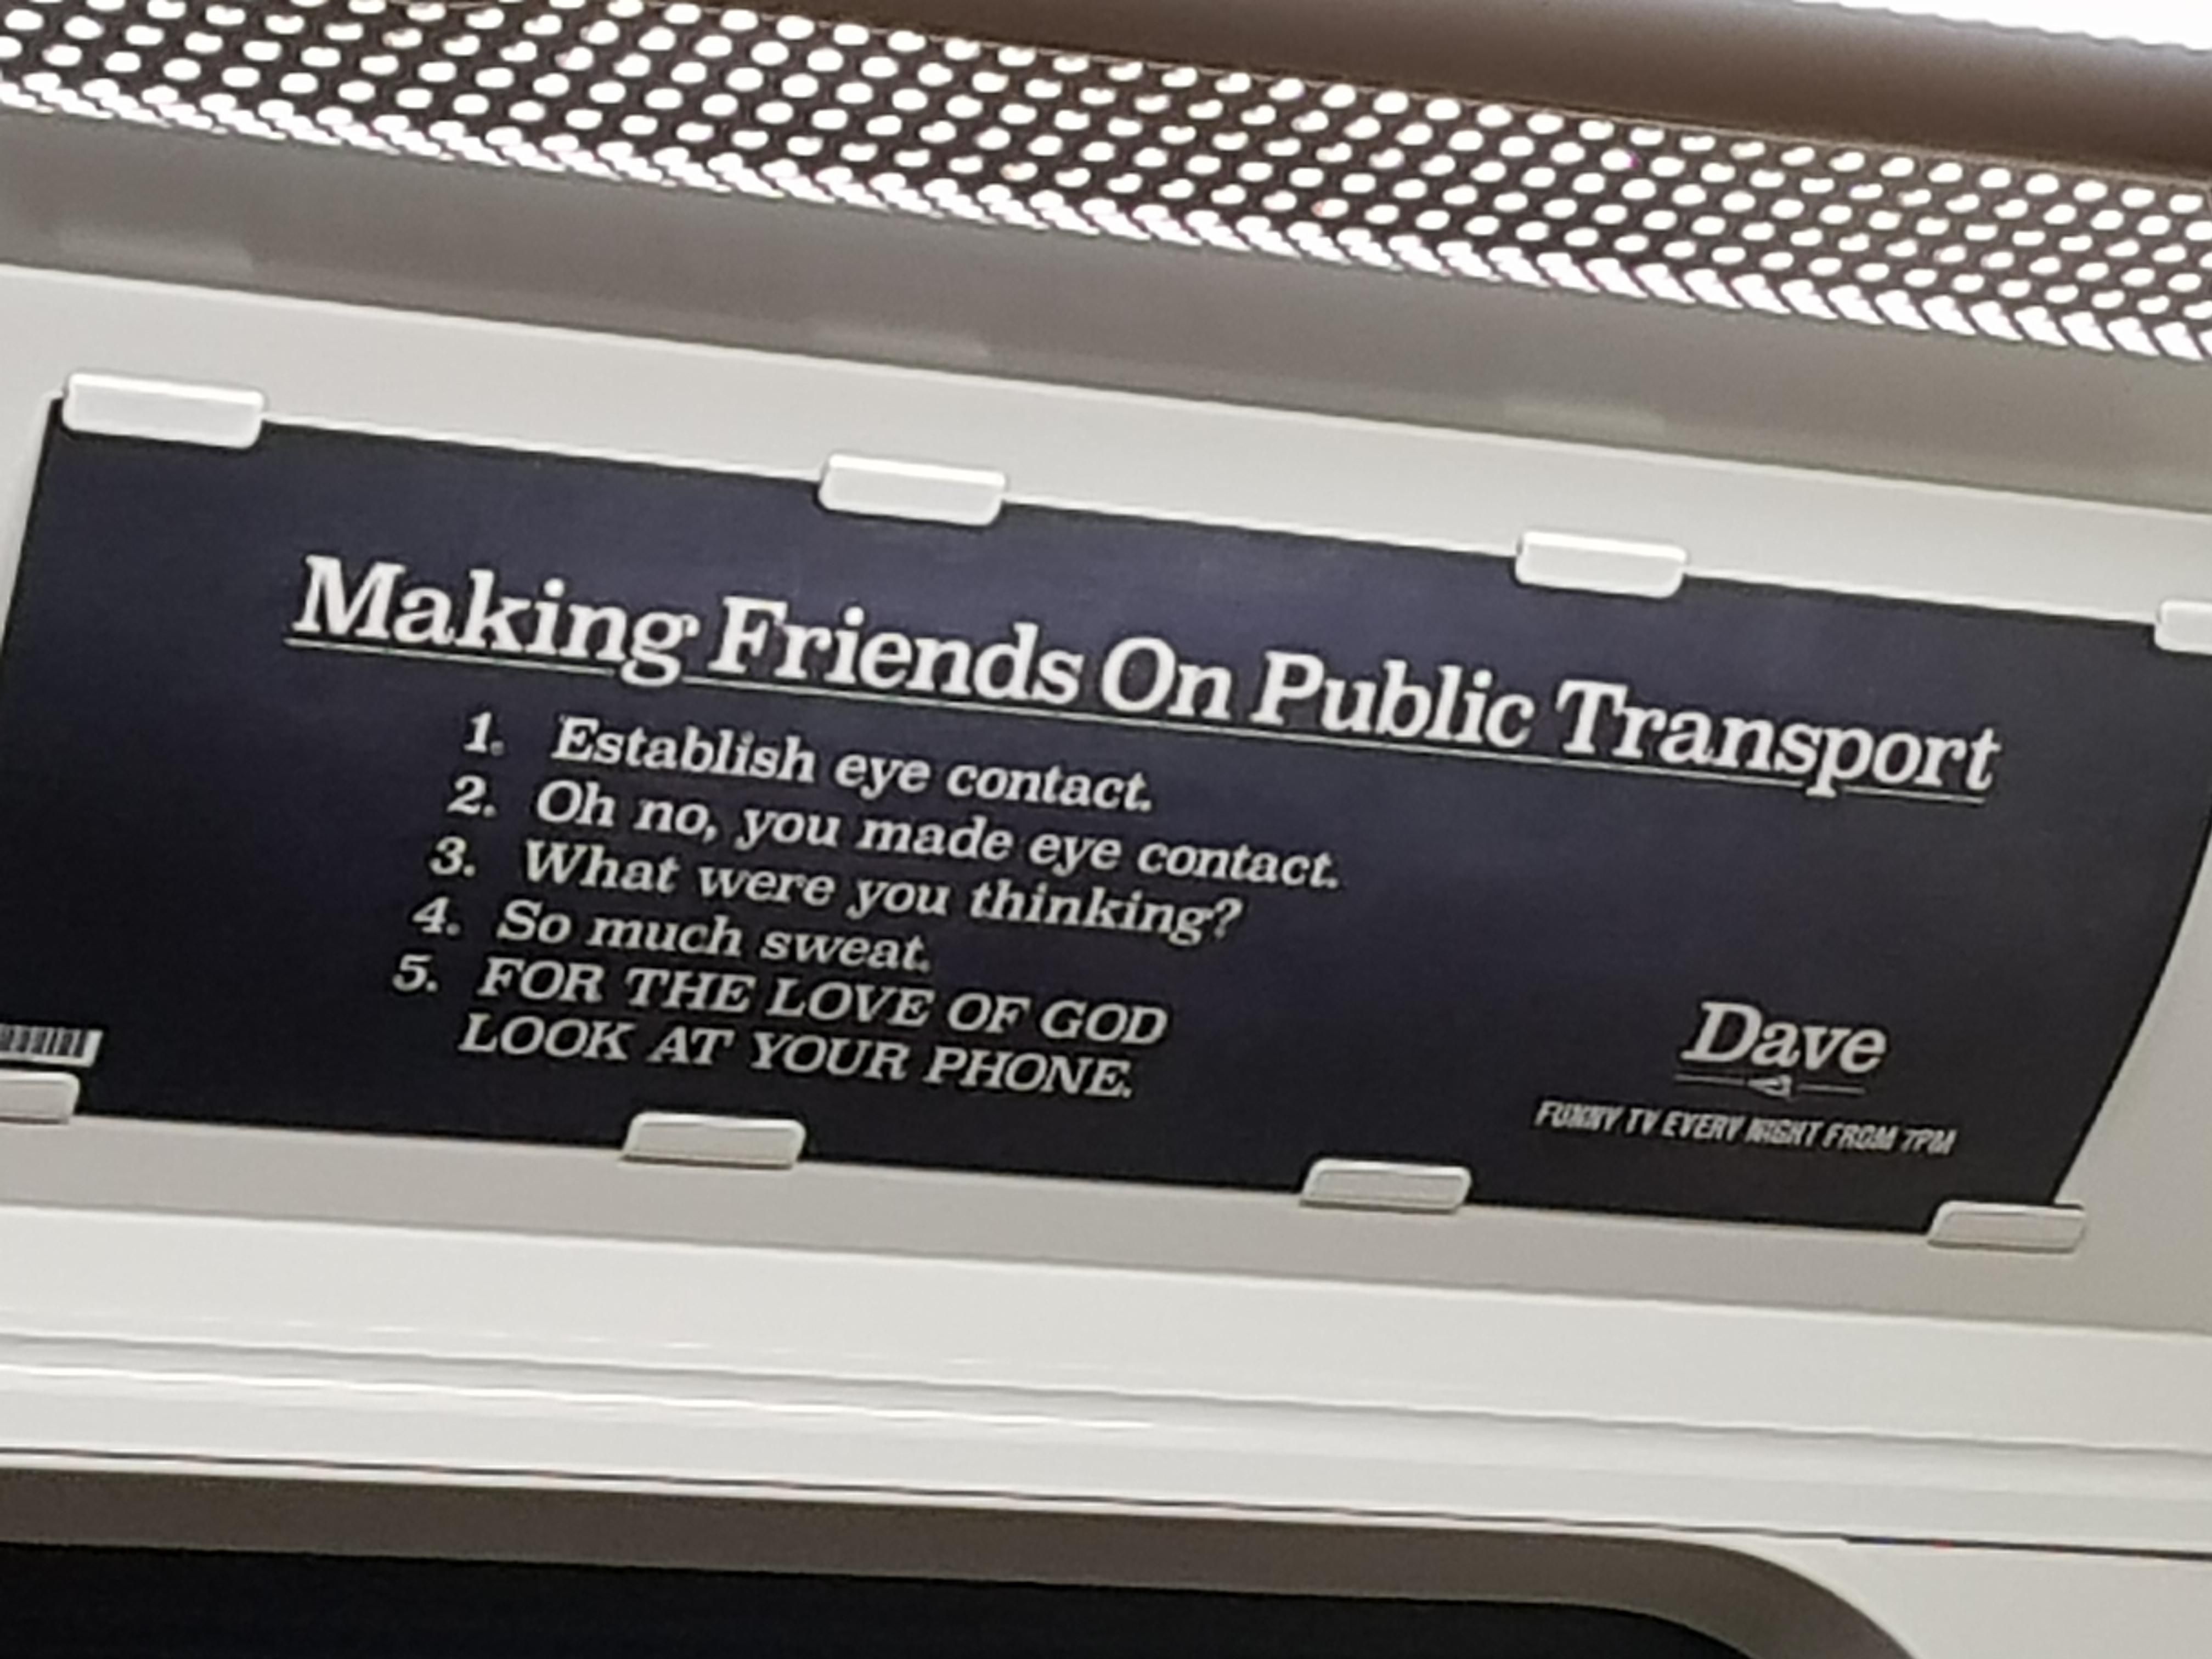 How to make friends on public transport.